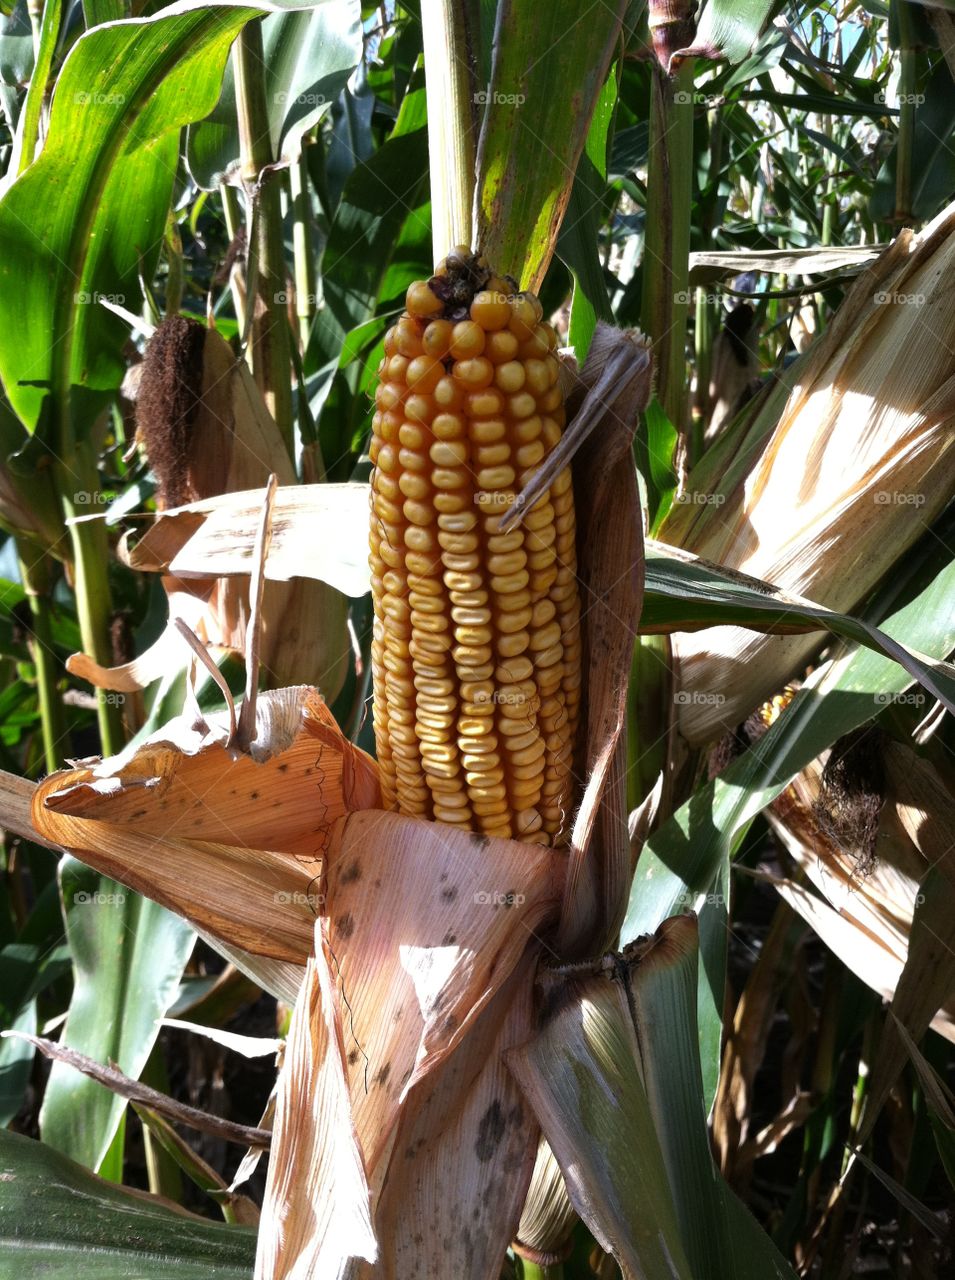 Corn on the cob growing in nature